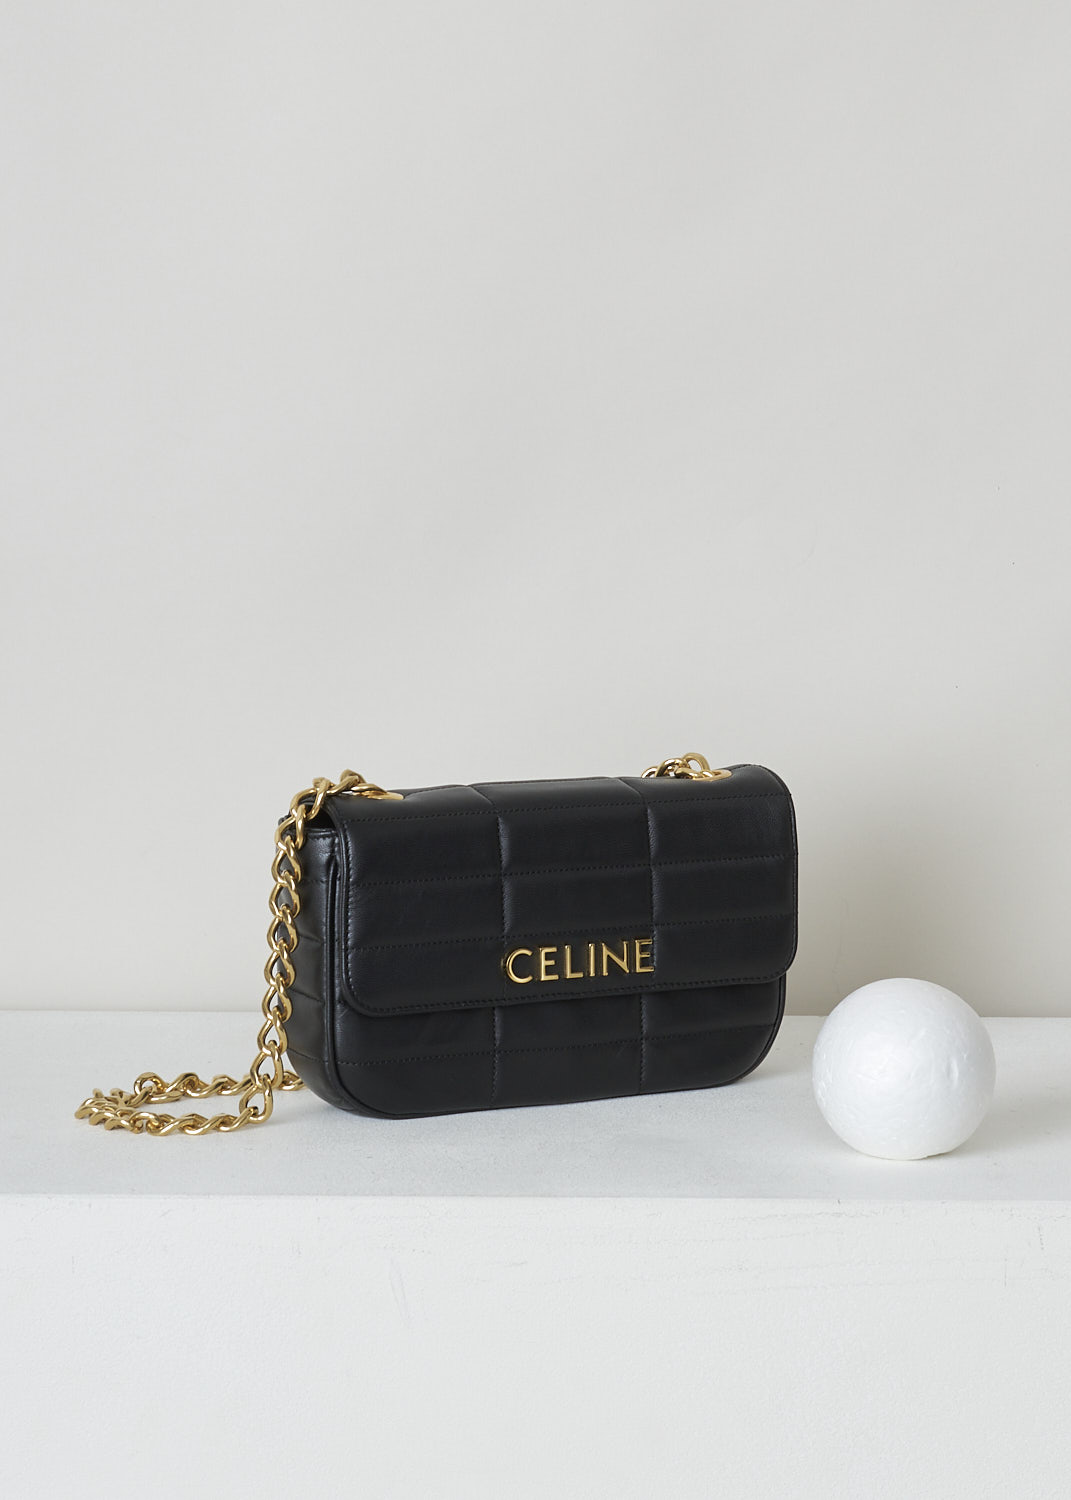 CELINE, BLACK MATELASSÉ SHOULDER BAG WITH GOLD CHAIN, 111273EPZ_38NO, Black, Side, This black matelassé shoulder bag has gold-tone metal hardware with the brand's lettering on the front and a gold chain shoulder strap. The bag has a snap button closure. The flap opens to the main compartment with a inner pocket to the backside


